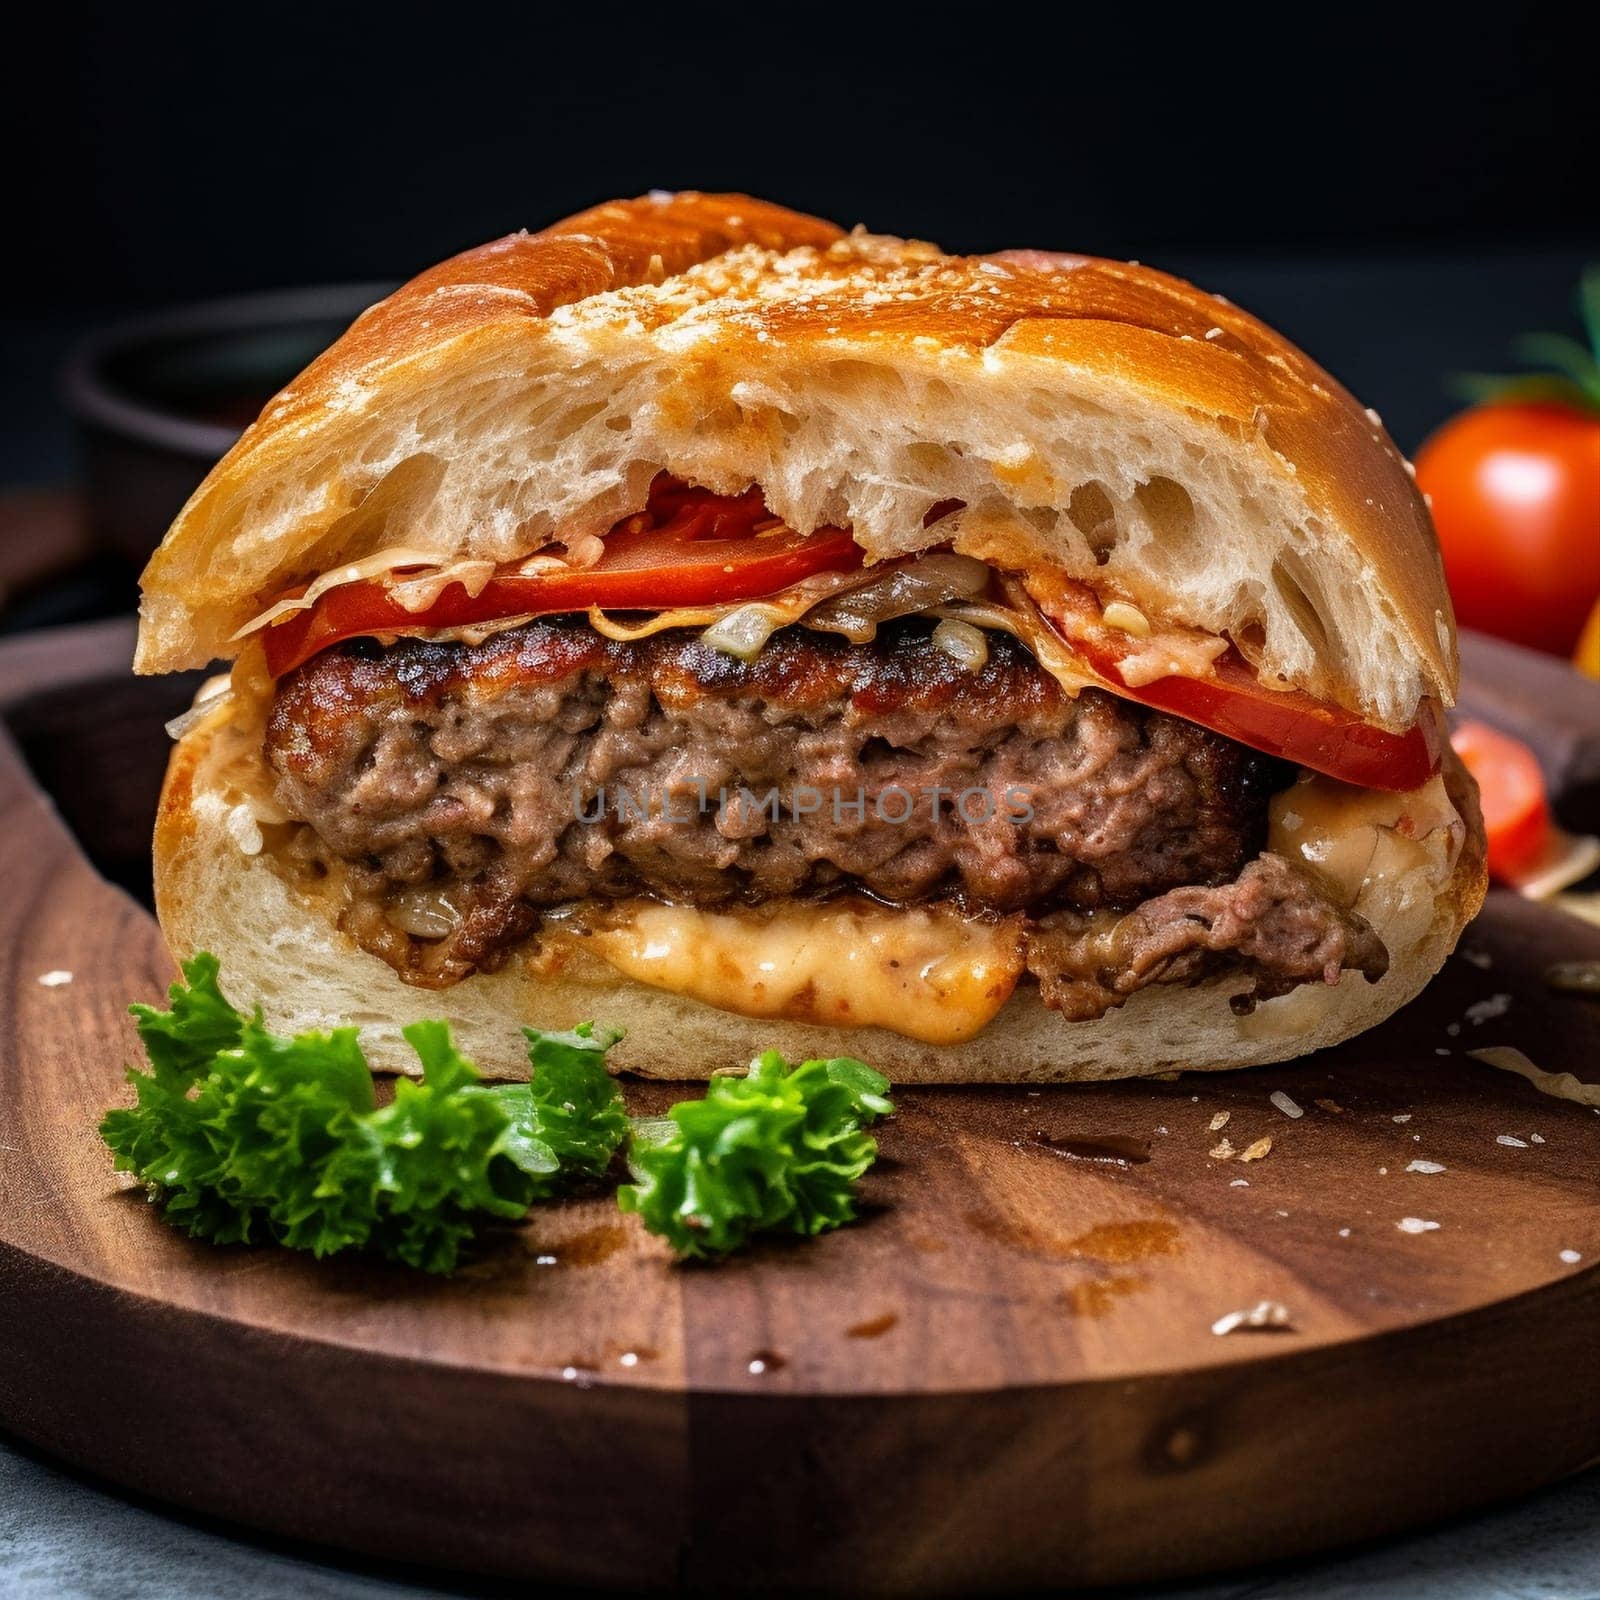 Capture the mouthwatering and juicy essence of Serbian Pljeskavica, a grilled meat patty made with a mixture of ground meat (usually beef or pork), grilled to perfection, and served on a bun with a variety of toppings like cheese, onion, and tomato. It is often served with a side of fries or salad, and is a staple of Serbian cuisine. Use a 50mm prime lens on a full-frame camera to capture a close-up shot of the Pljeskavica, highlighting its texture and bright colors in a lively and colorful outdoor scene with dramatic lighting. Use bright, natural lighting with a reflector to highlight the texture and colors of the Pljeskavica, creating a mouthwatering and juicy mood.